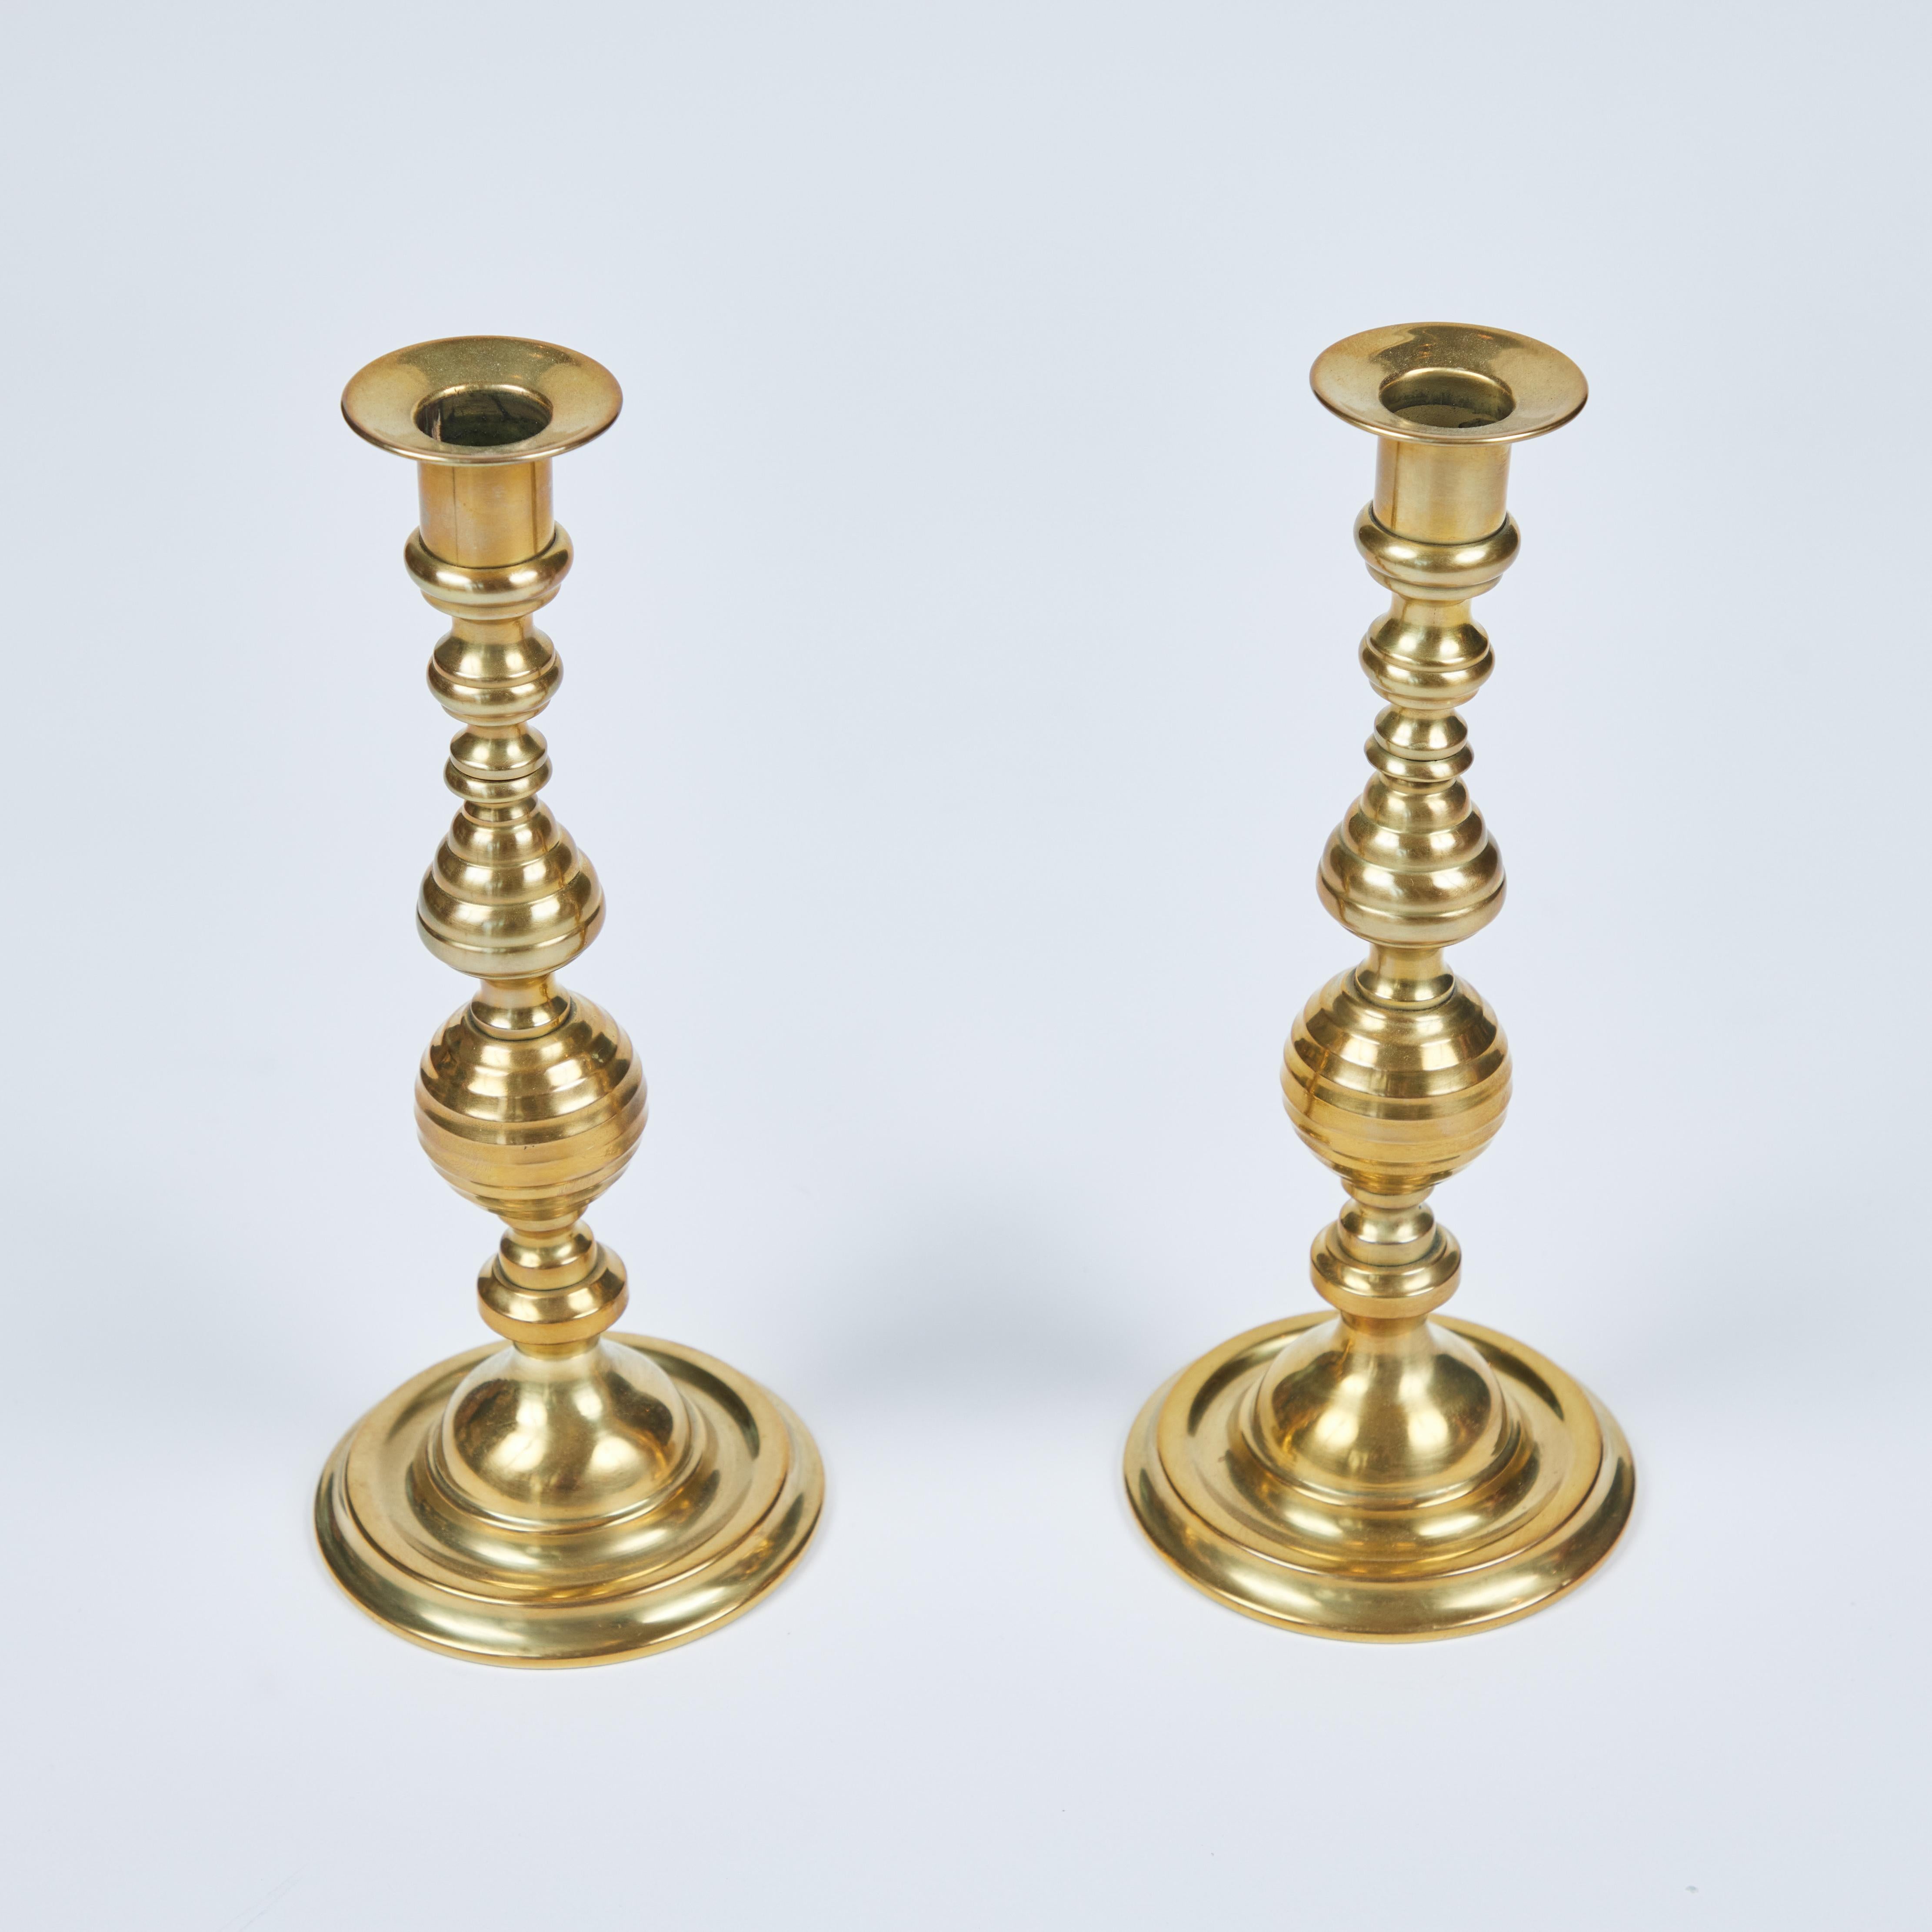 So distinctly classic, these vintage brass 'Beehive' candlesticks from England are lovely. They have a beautiful shapely stem and simple round base, and have been newly polished in a rich satin Flemish finish. This pair would make a lovely statement